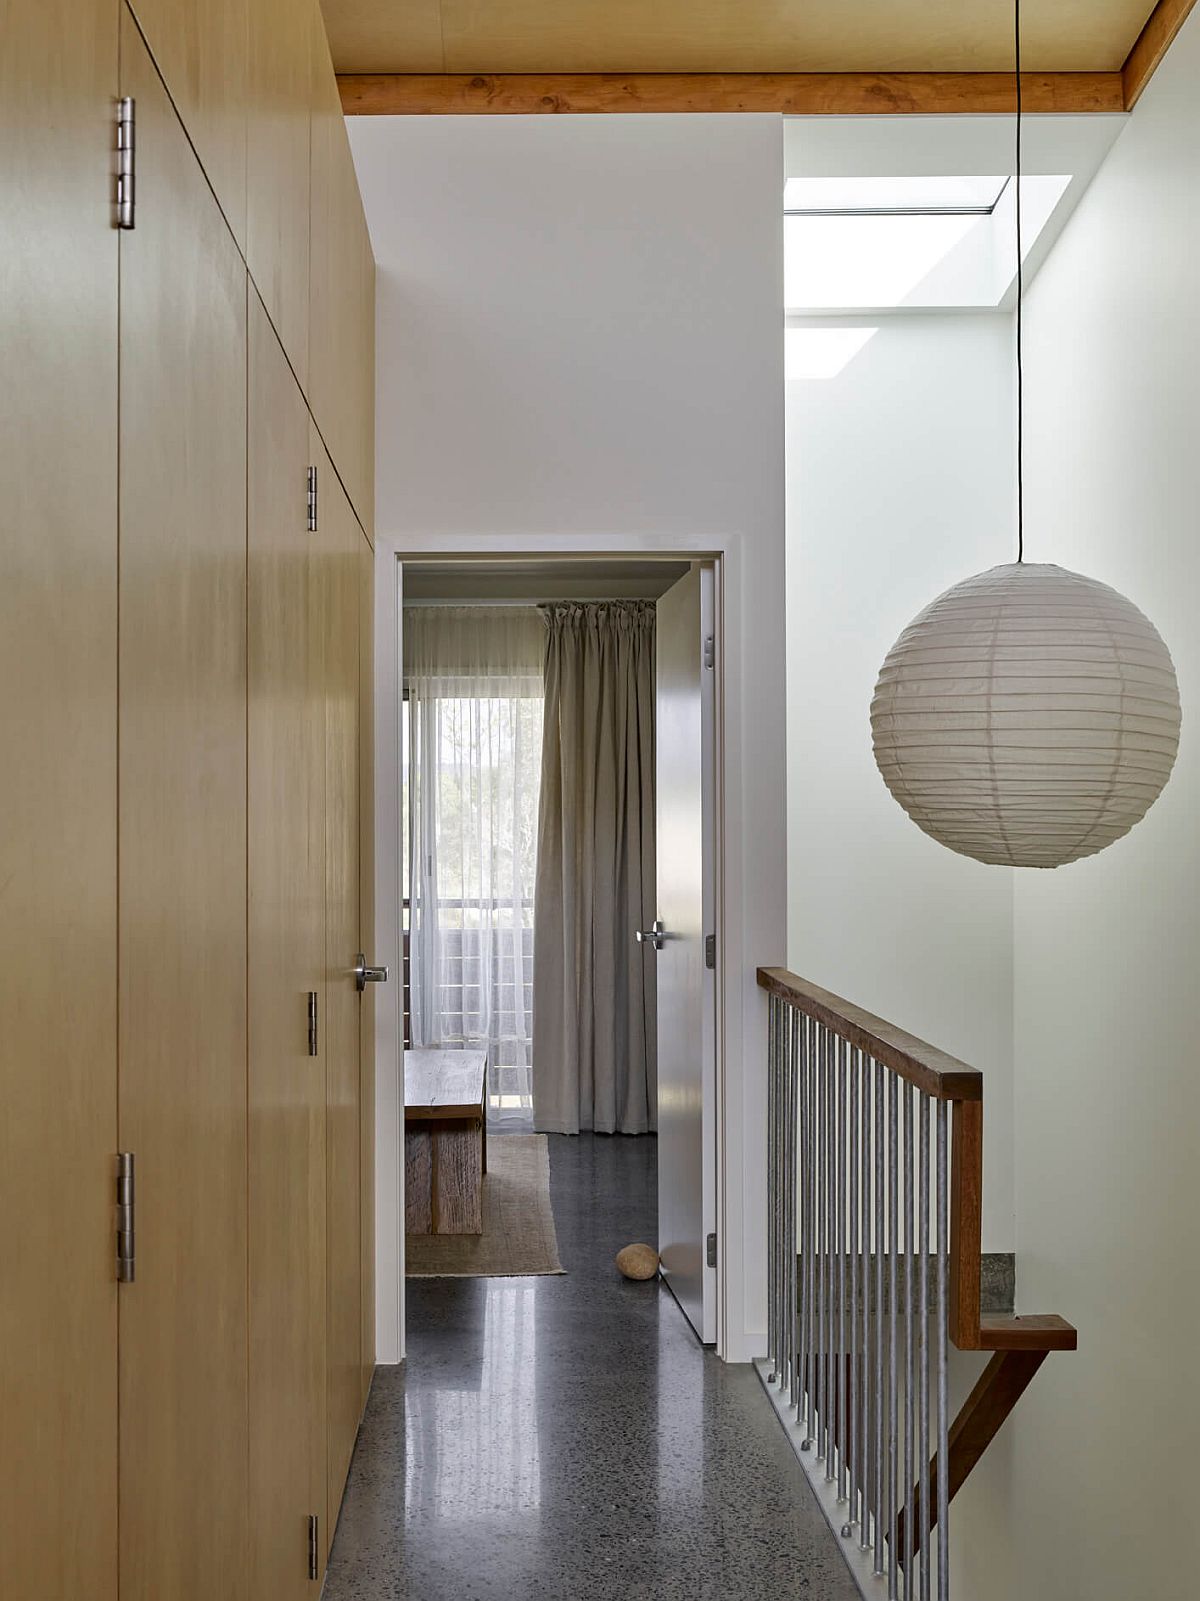 Stairwell-brings-natural-light-into-the-lower-level-of-the-unit-as-well-20967